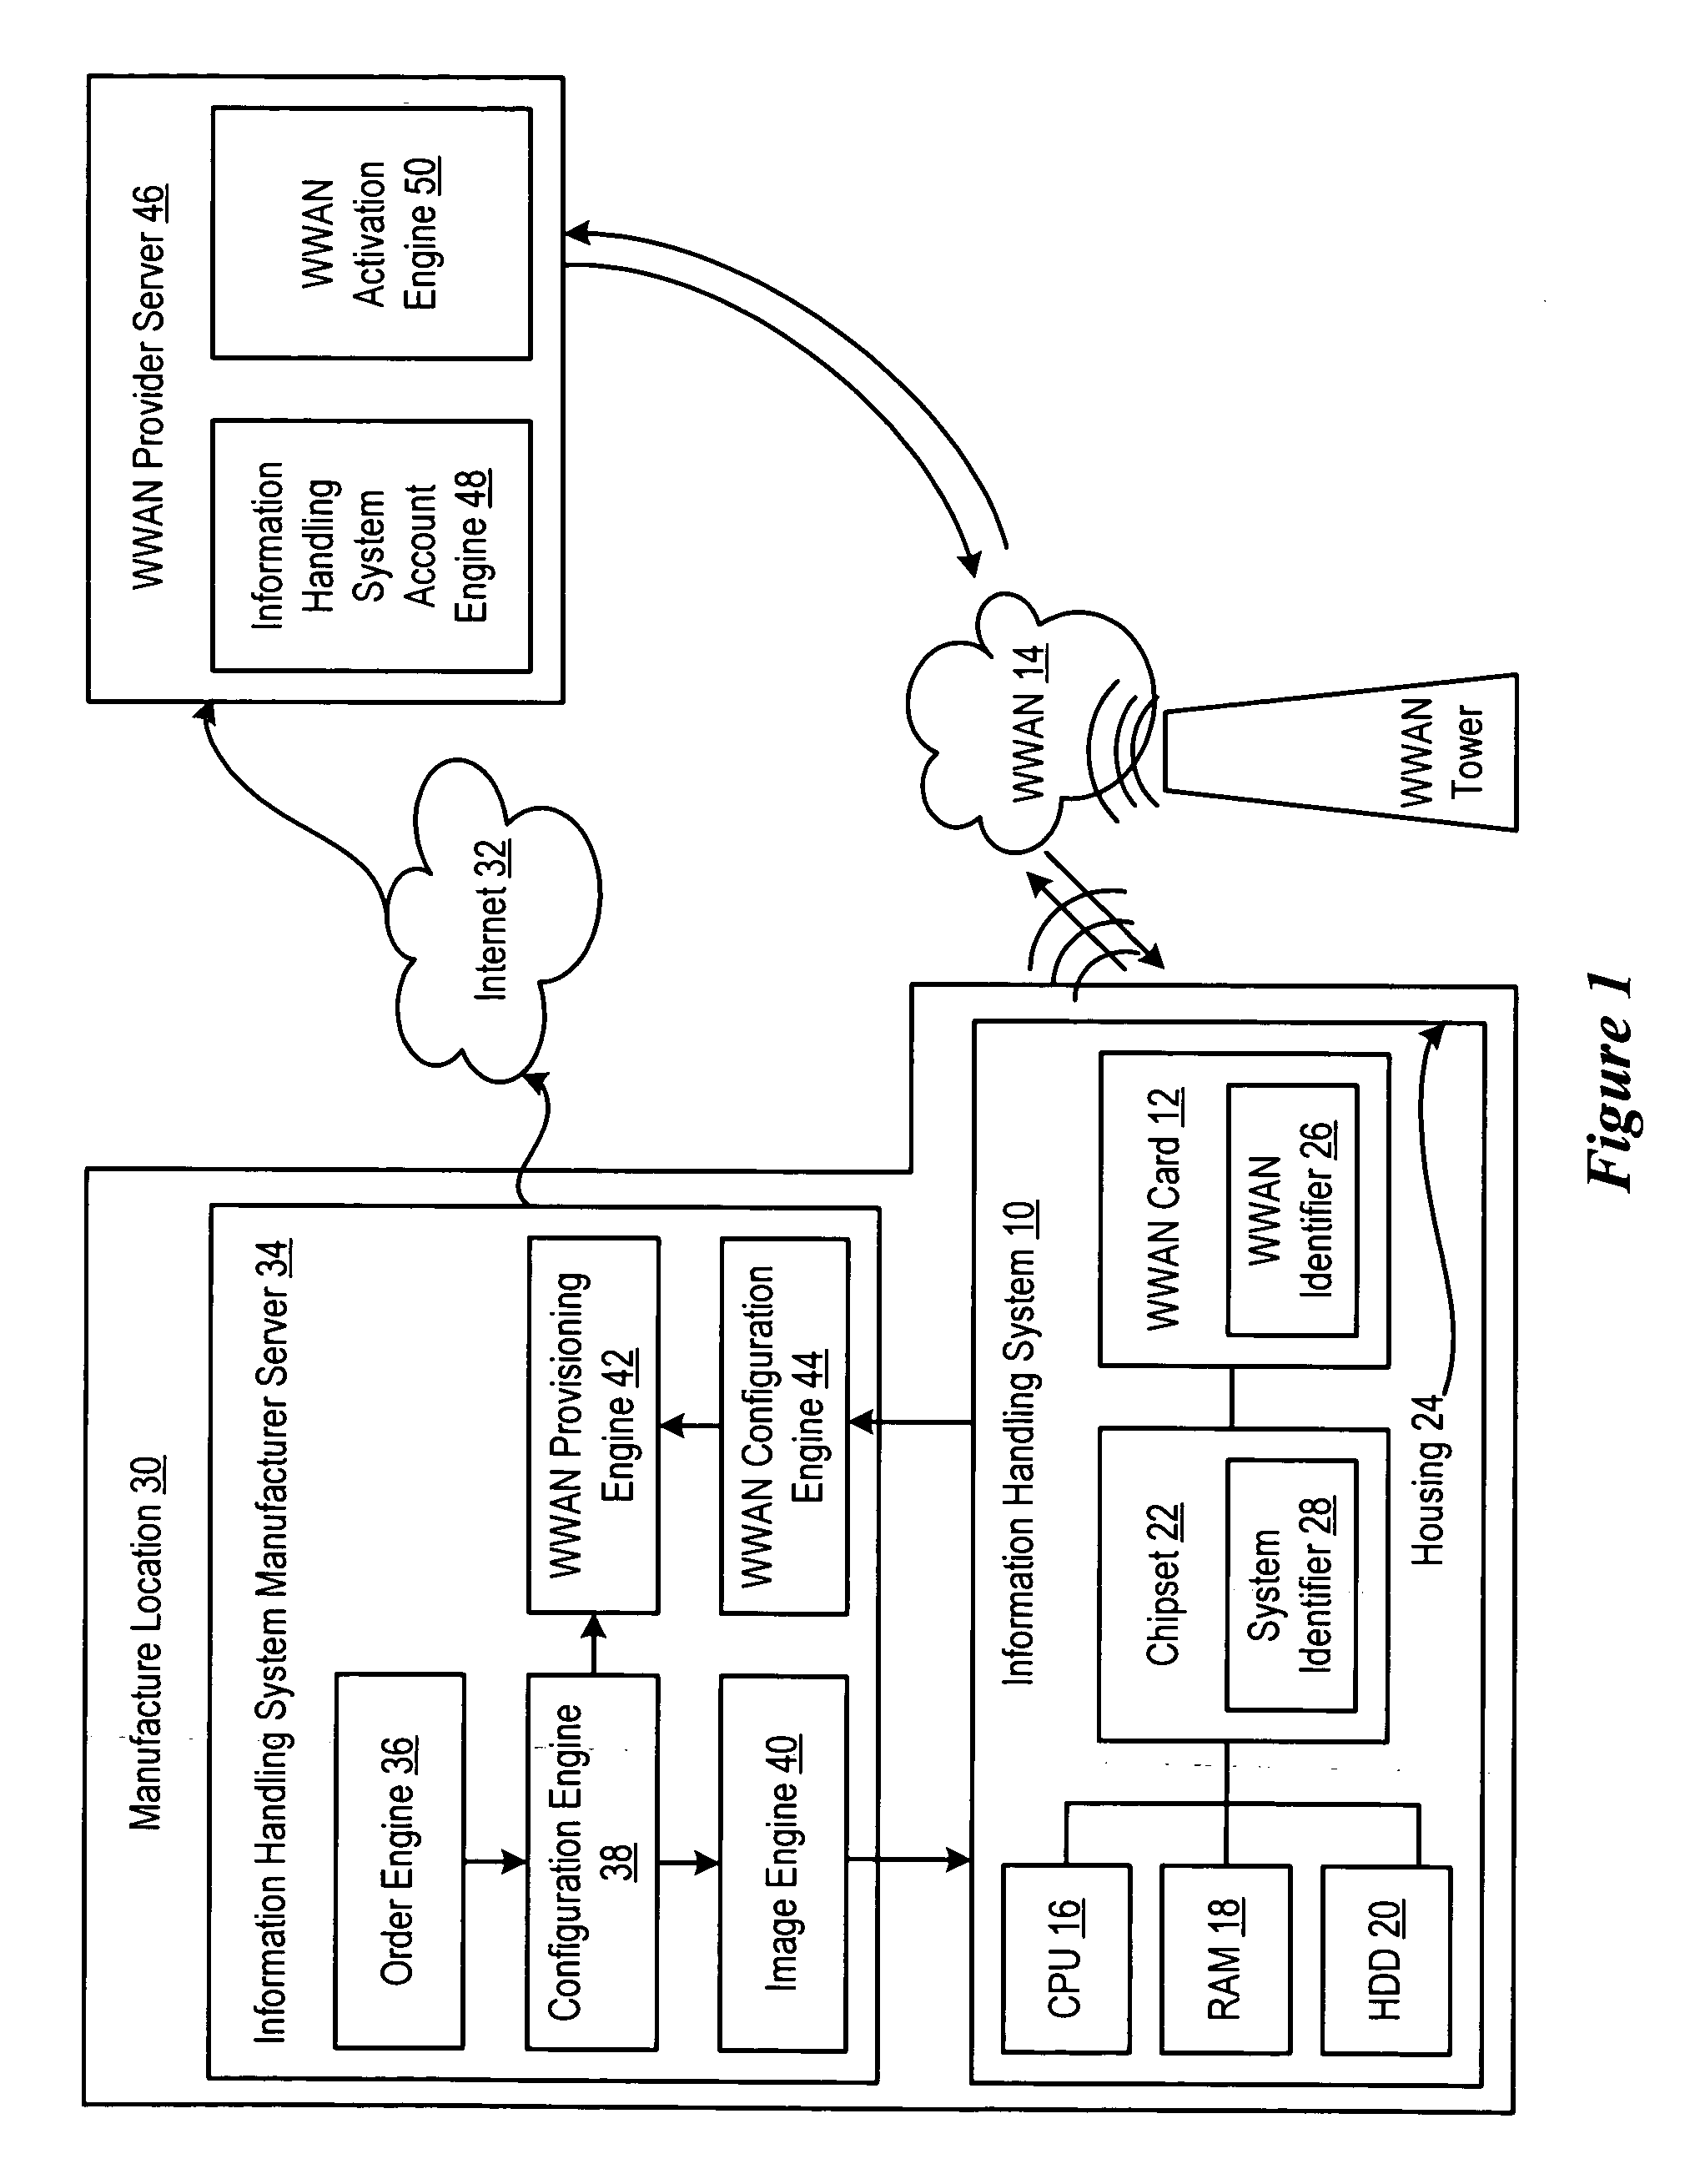 System and method for managing information handling system wireless network provisioning